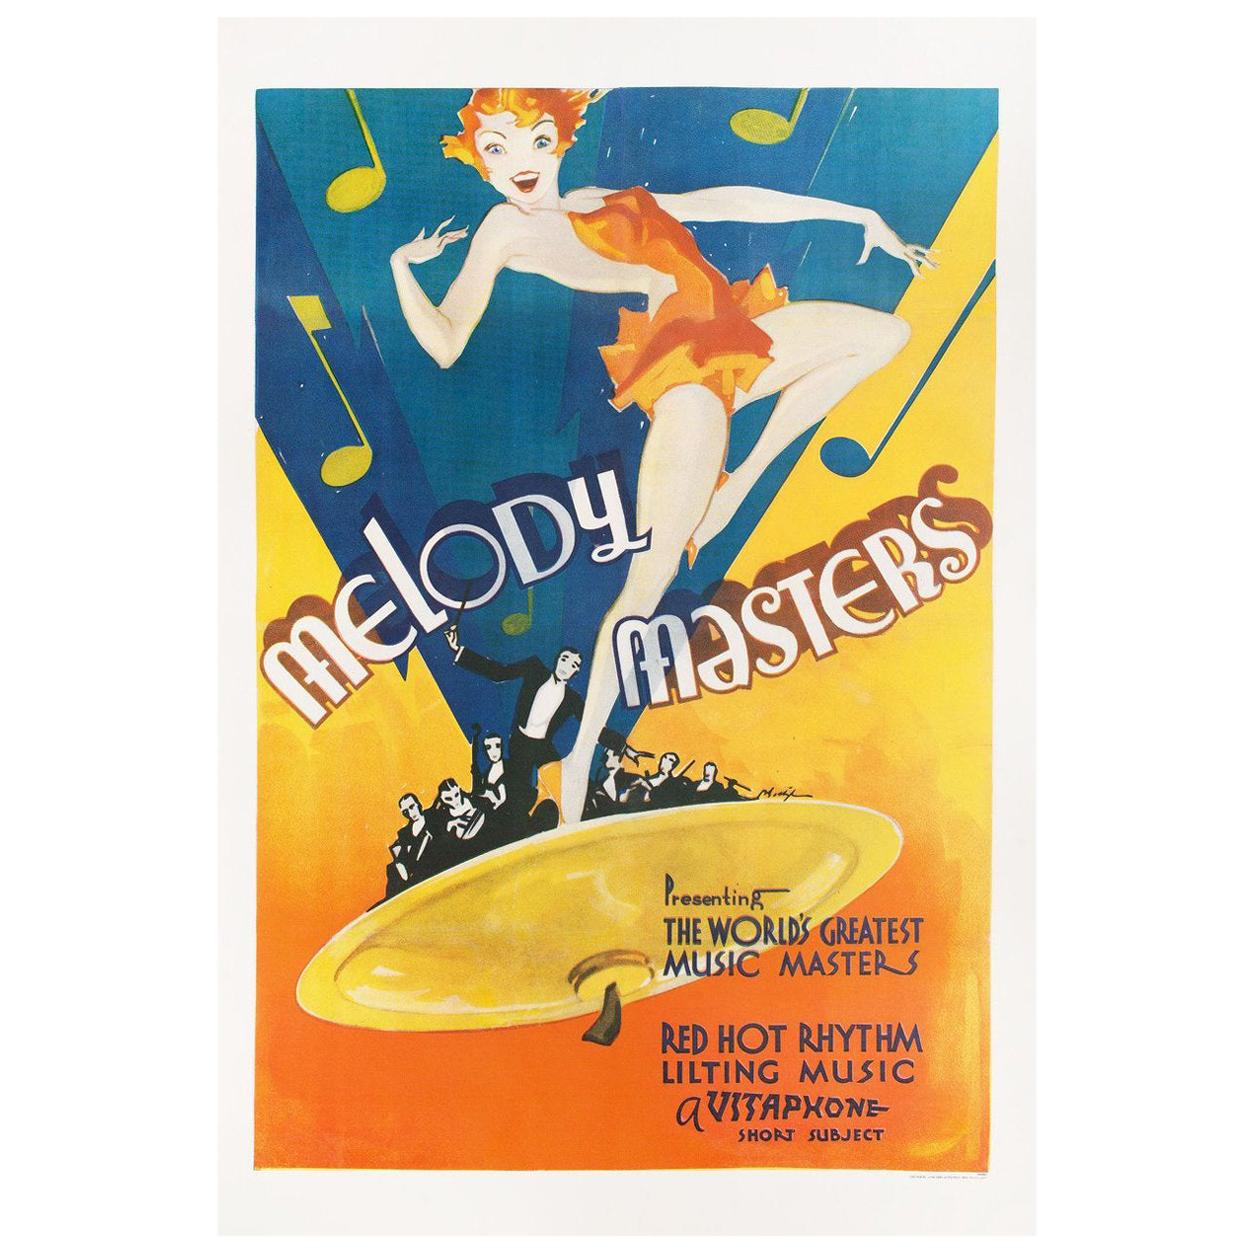 Melody Masters 1933 U.S. One Sheet Film Poster